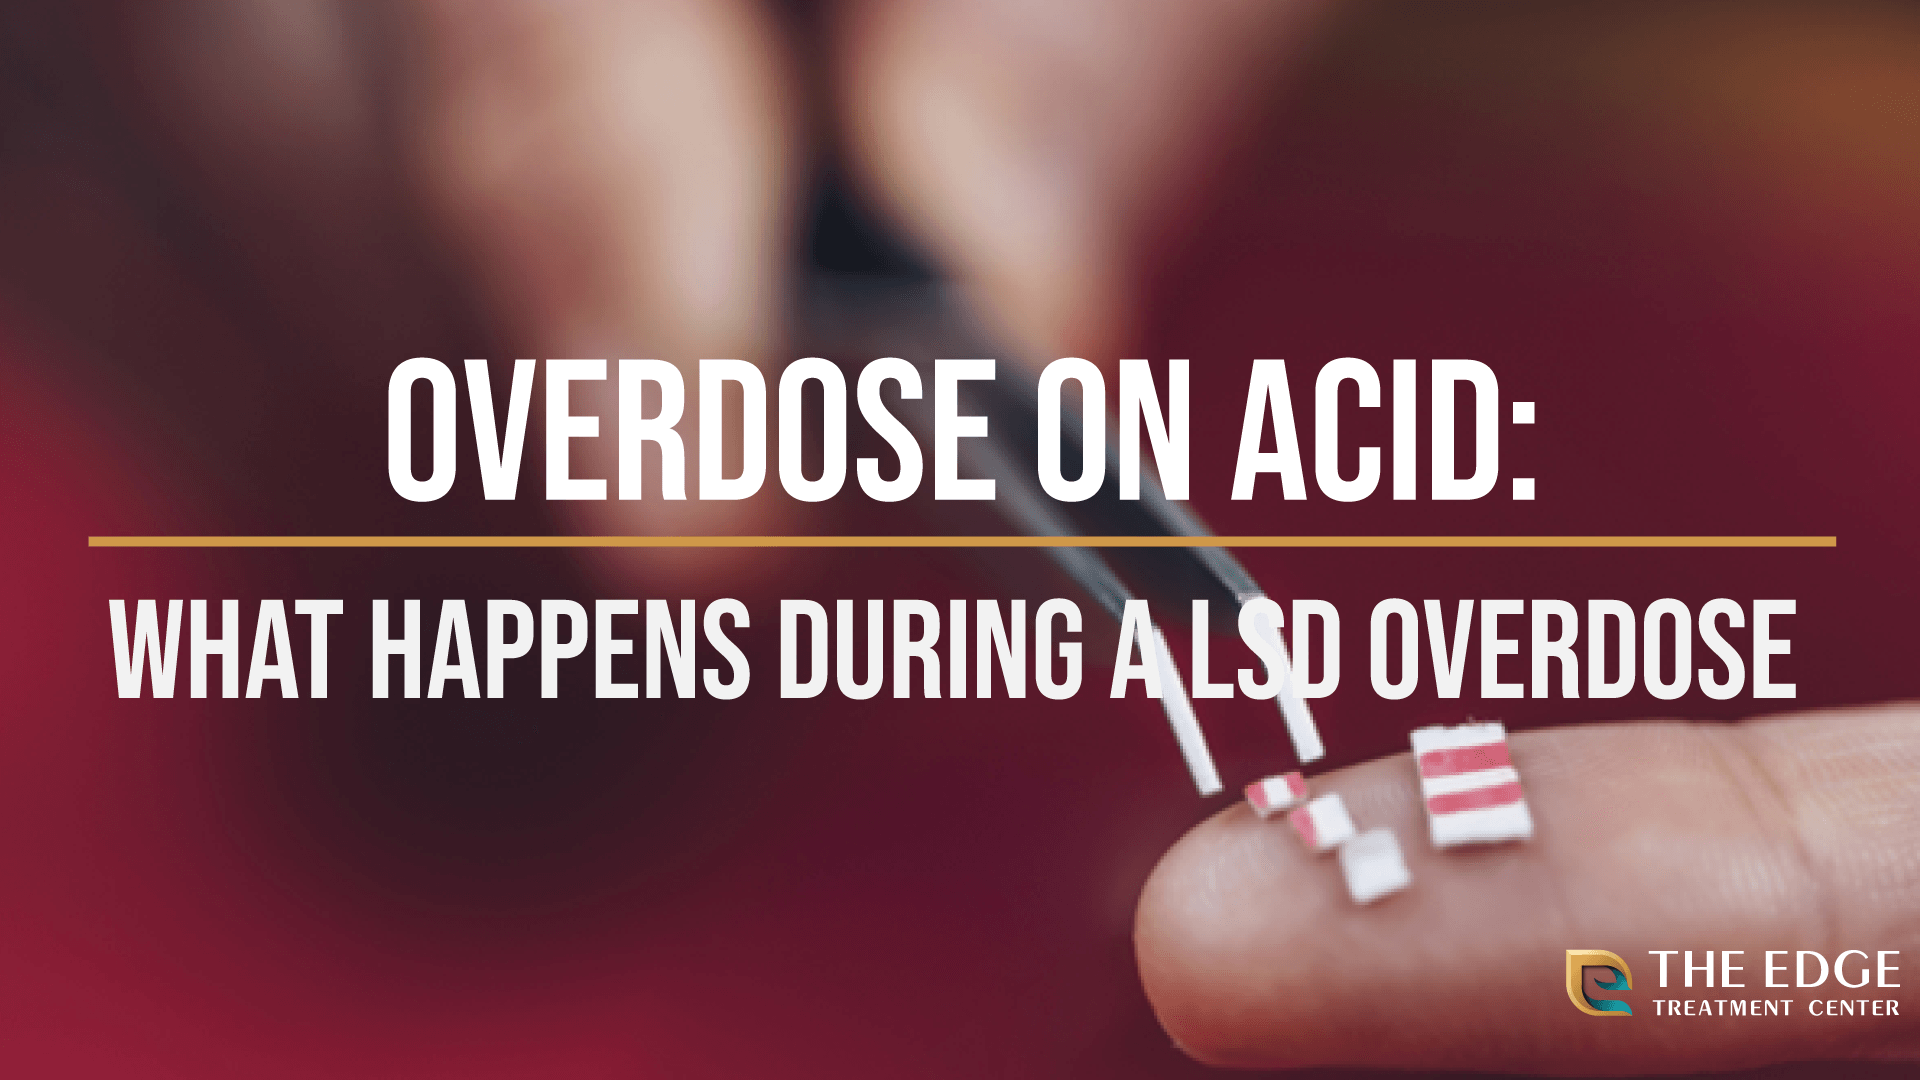 Can You Overdose on Acid?